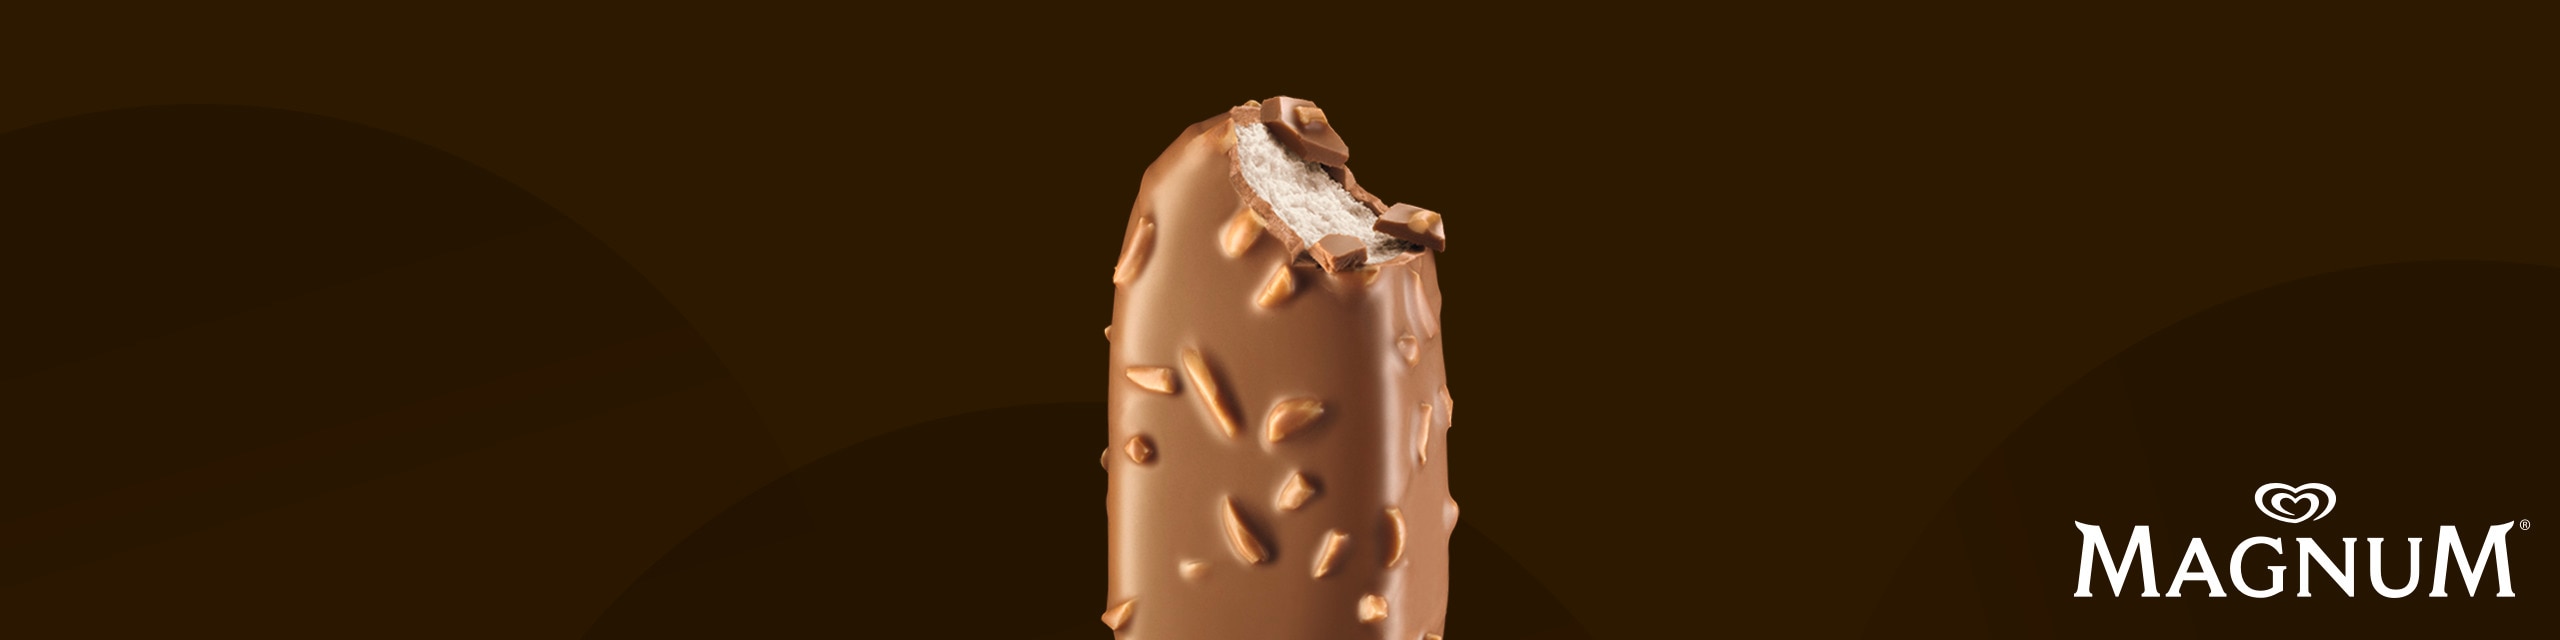 Magnum almond on a brown background